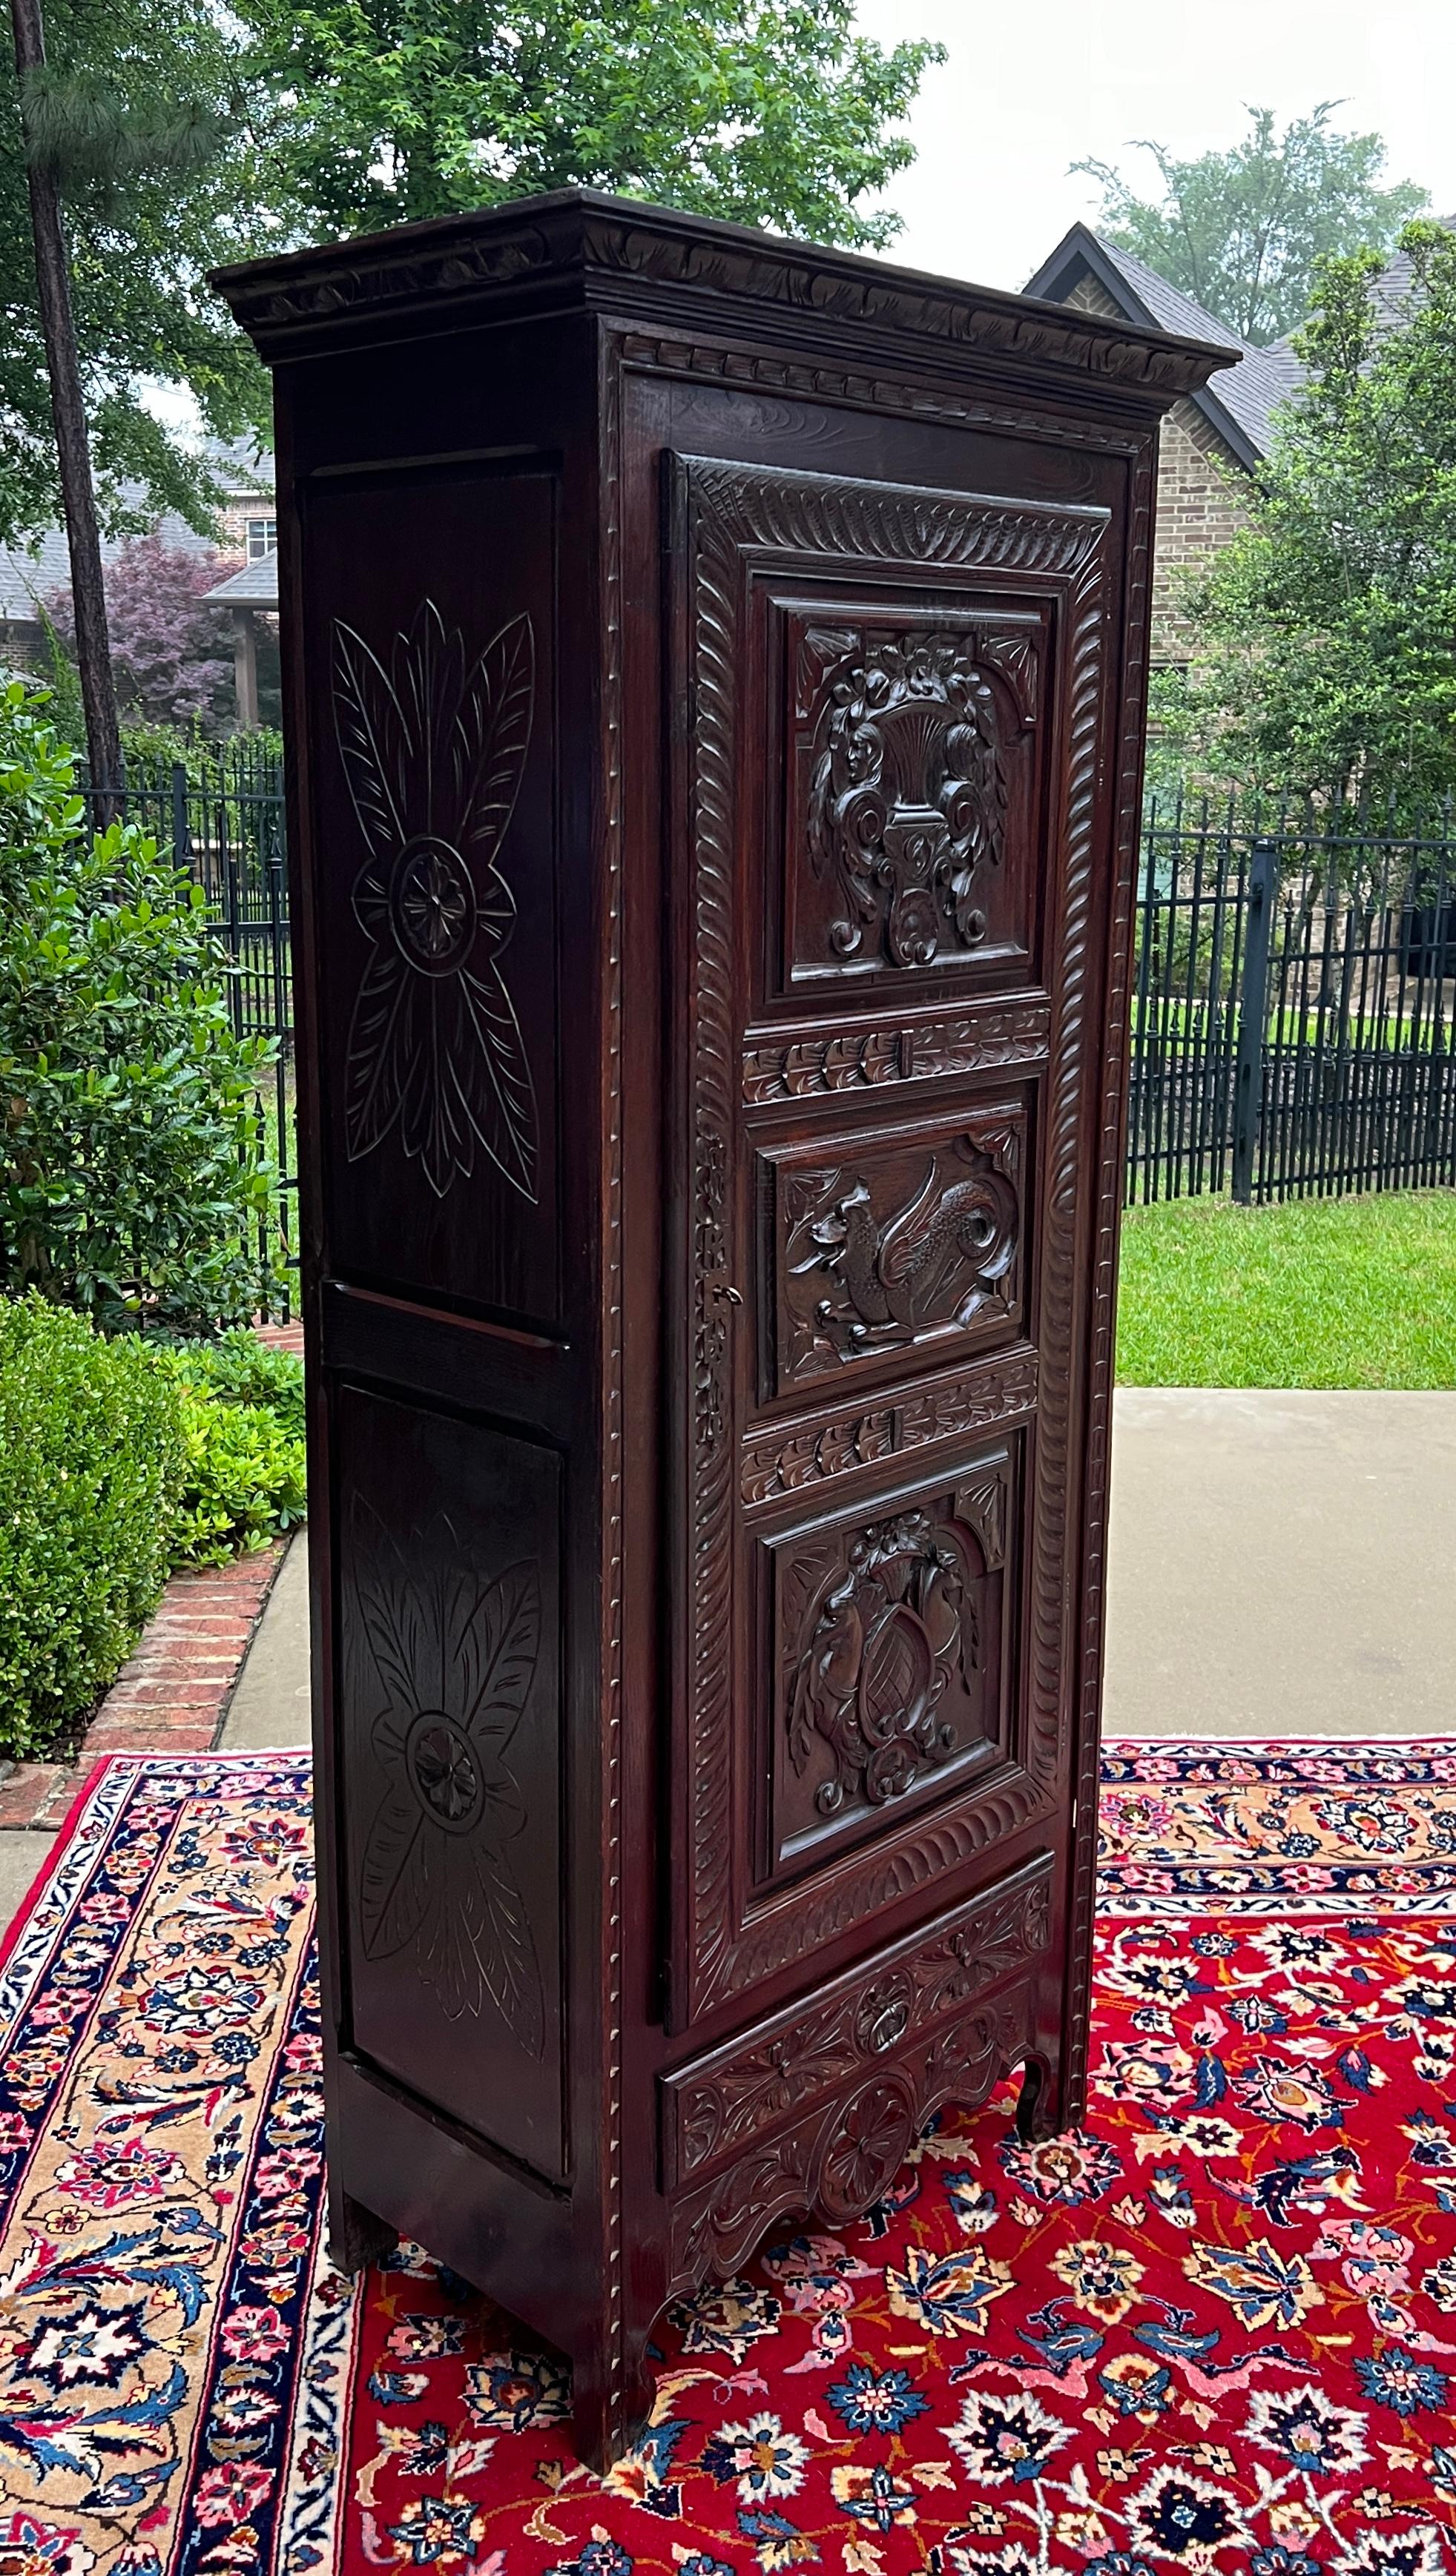 French Provincial Antique French Breton Armoire Wardrobe Cabinet Linen Closet Chestnut c. 1900-20s For Sale